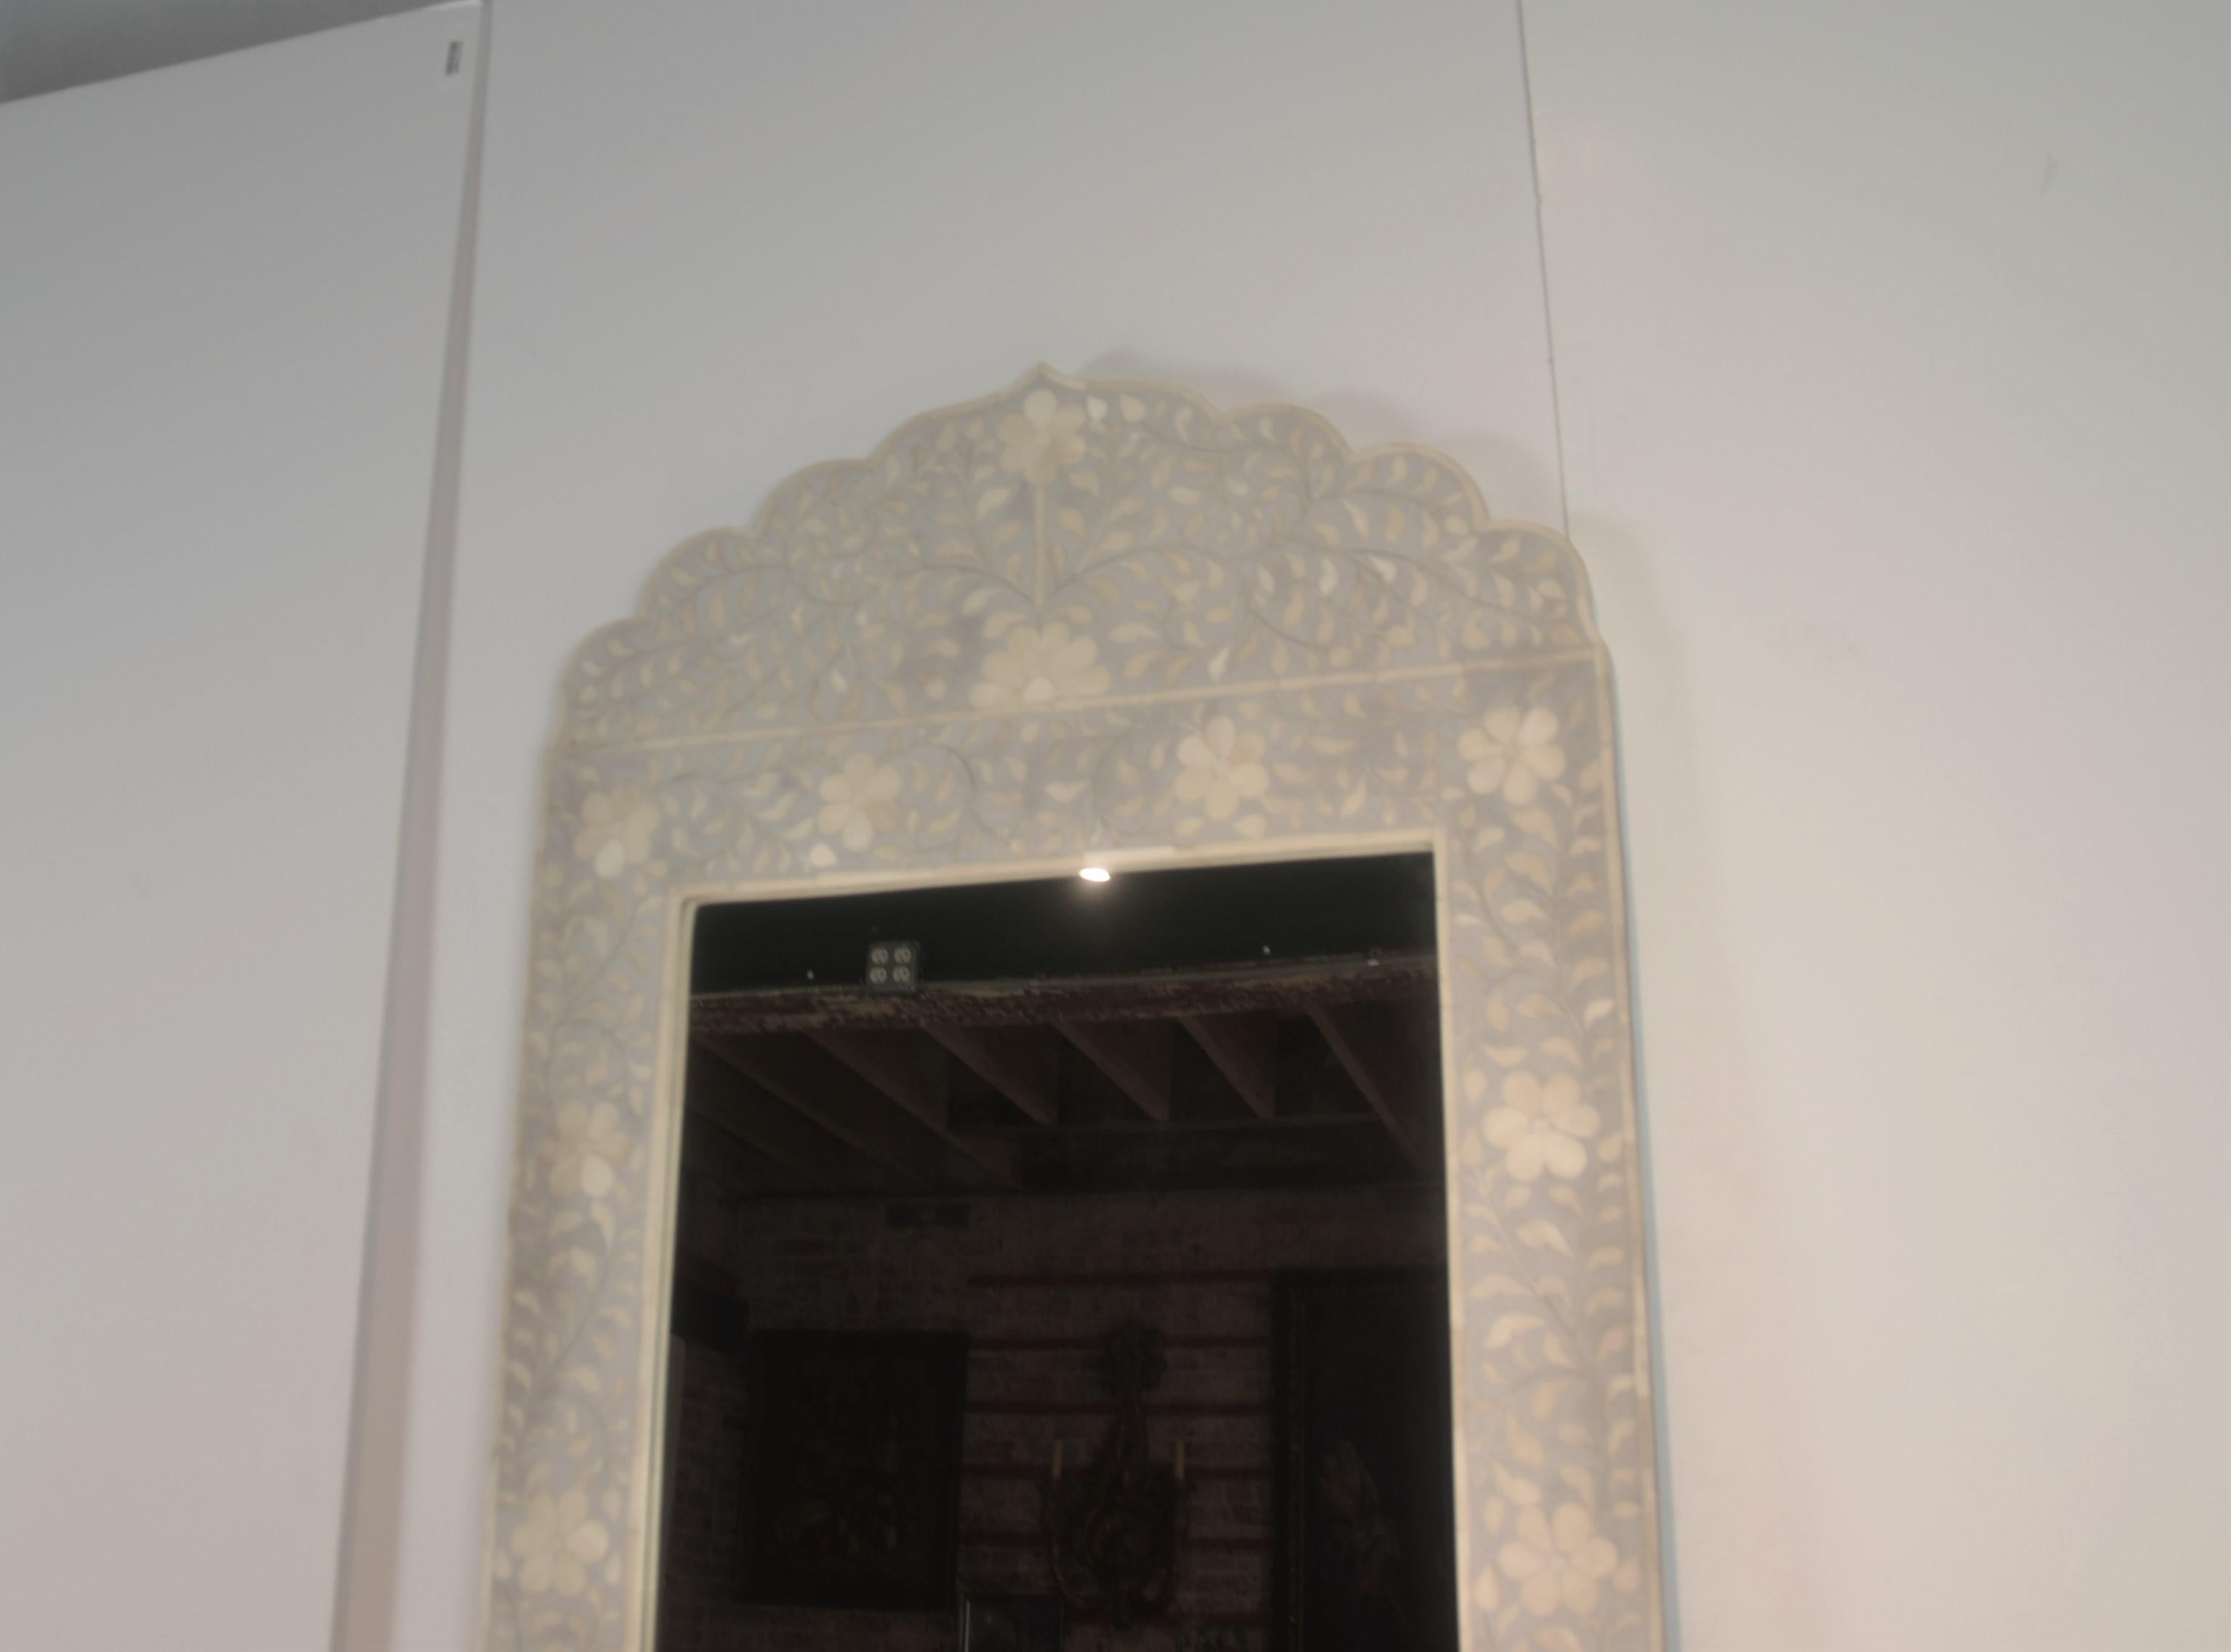 Large-scaled Moroccan mirror with intricate bone inlay.